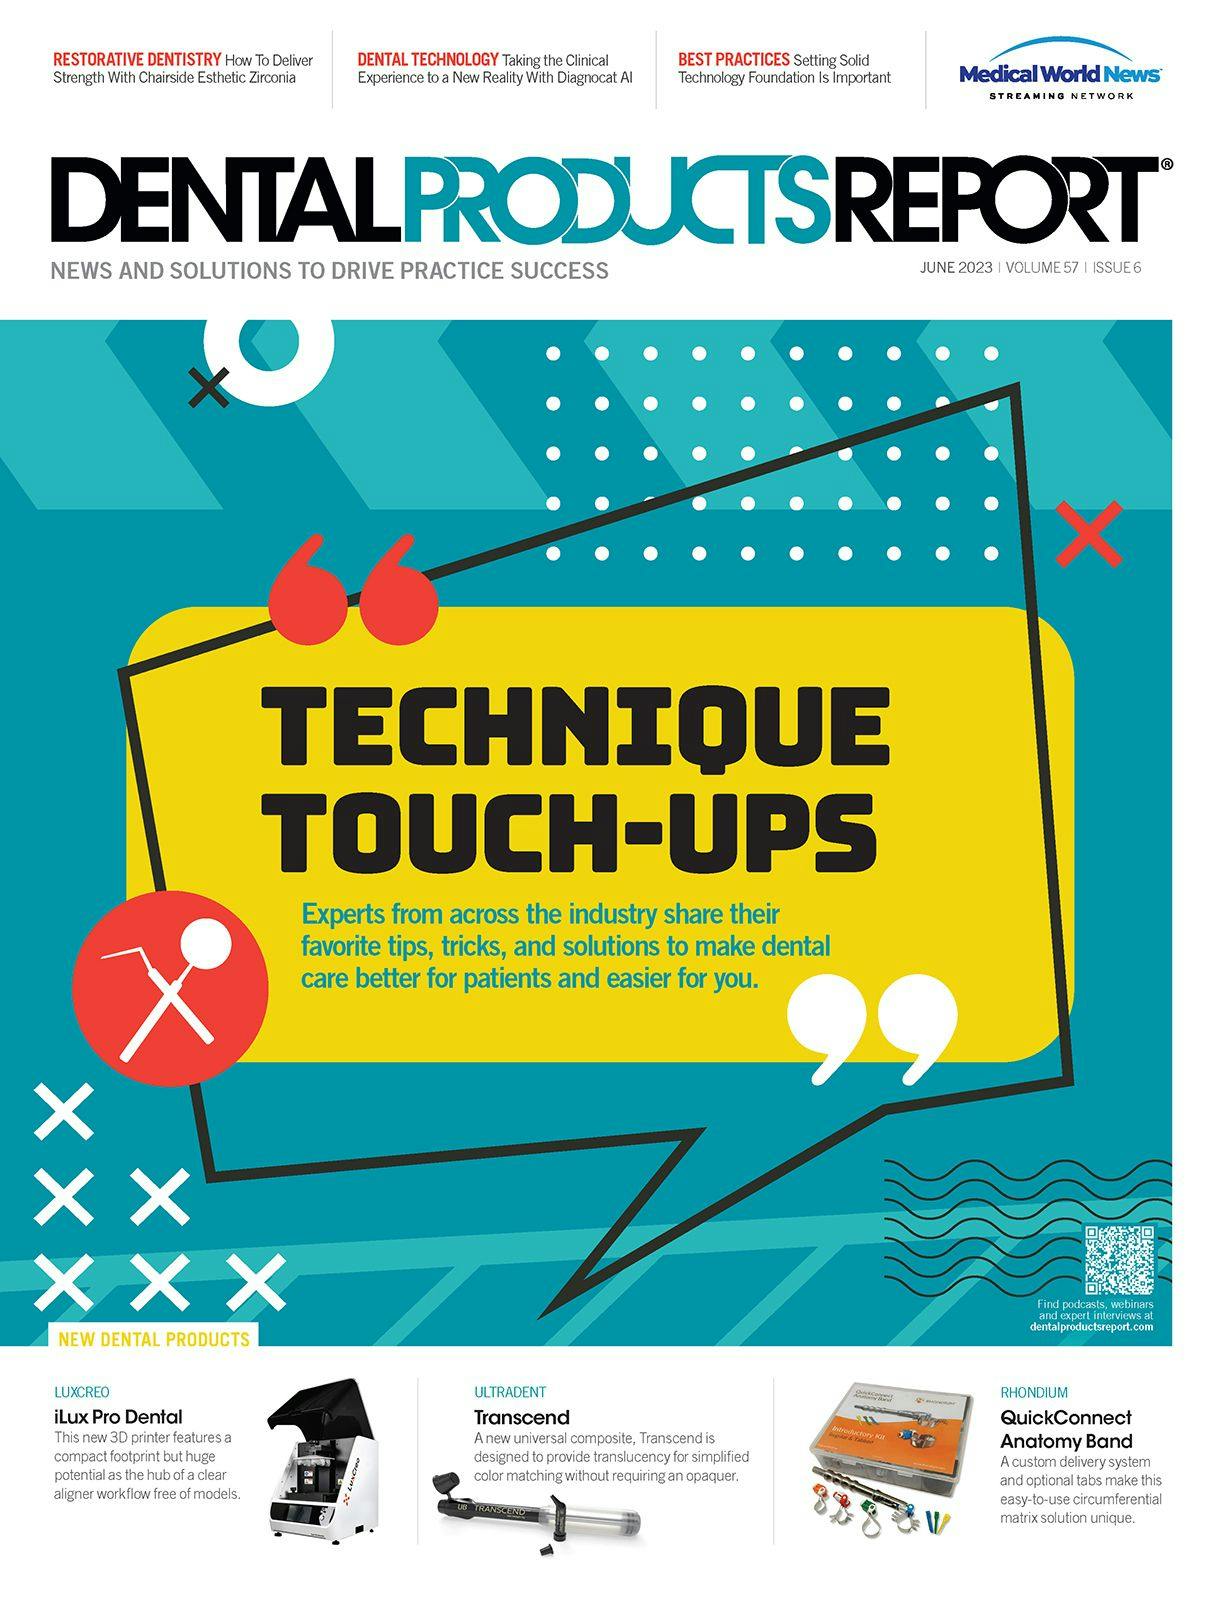 Dental Products Report June 2023 issue cover - Technique Touch-ups